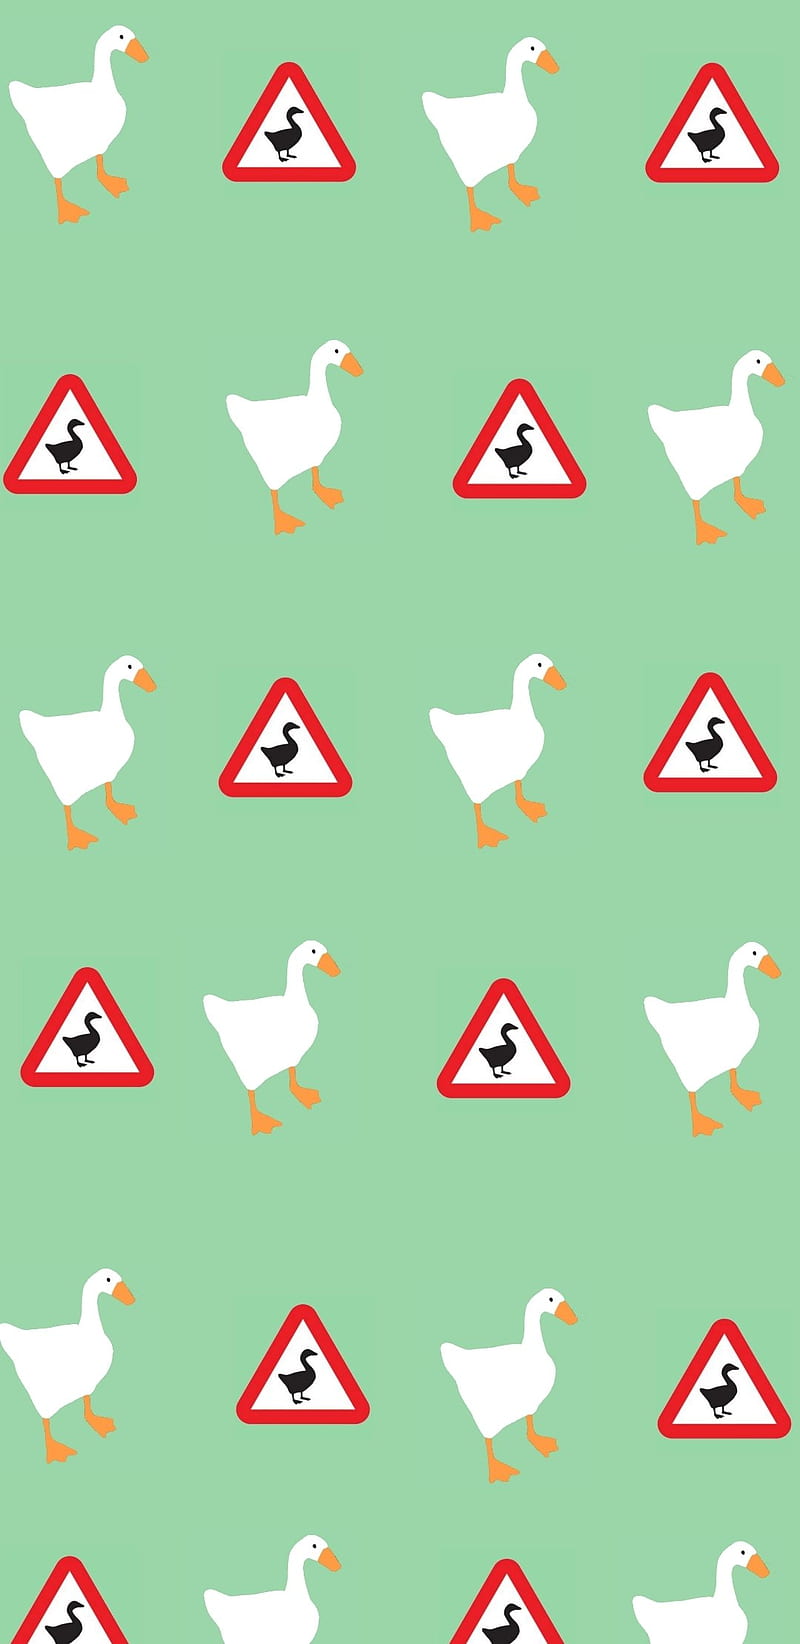 I made an Untitled Goose Game mobile wallpaper inspired by u